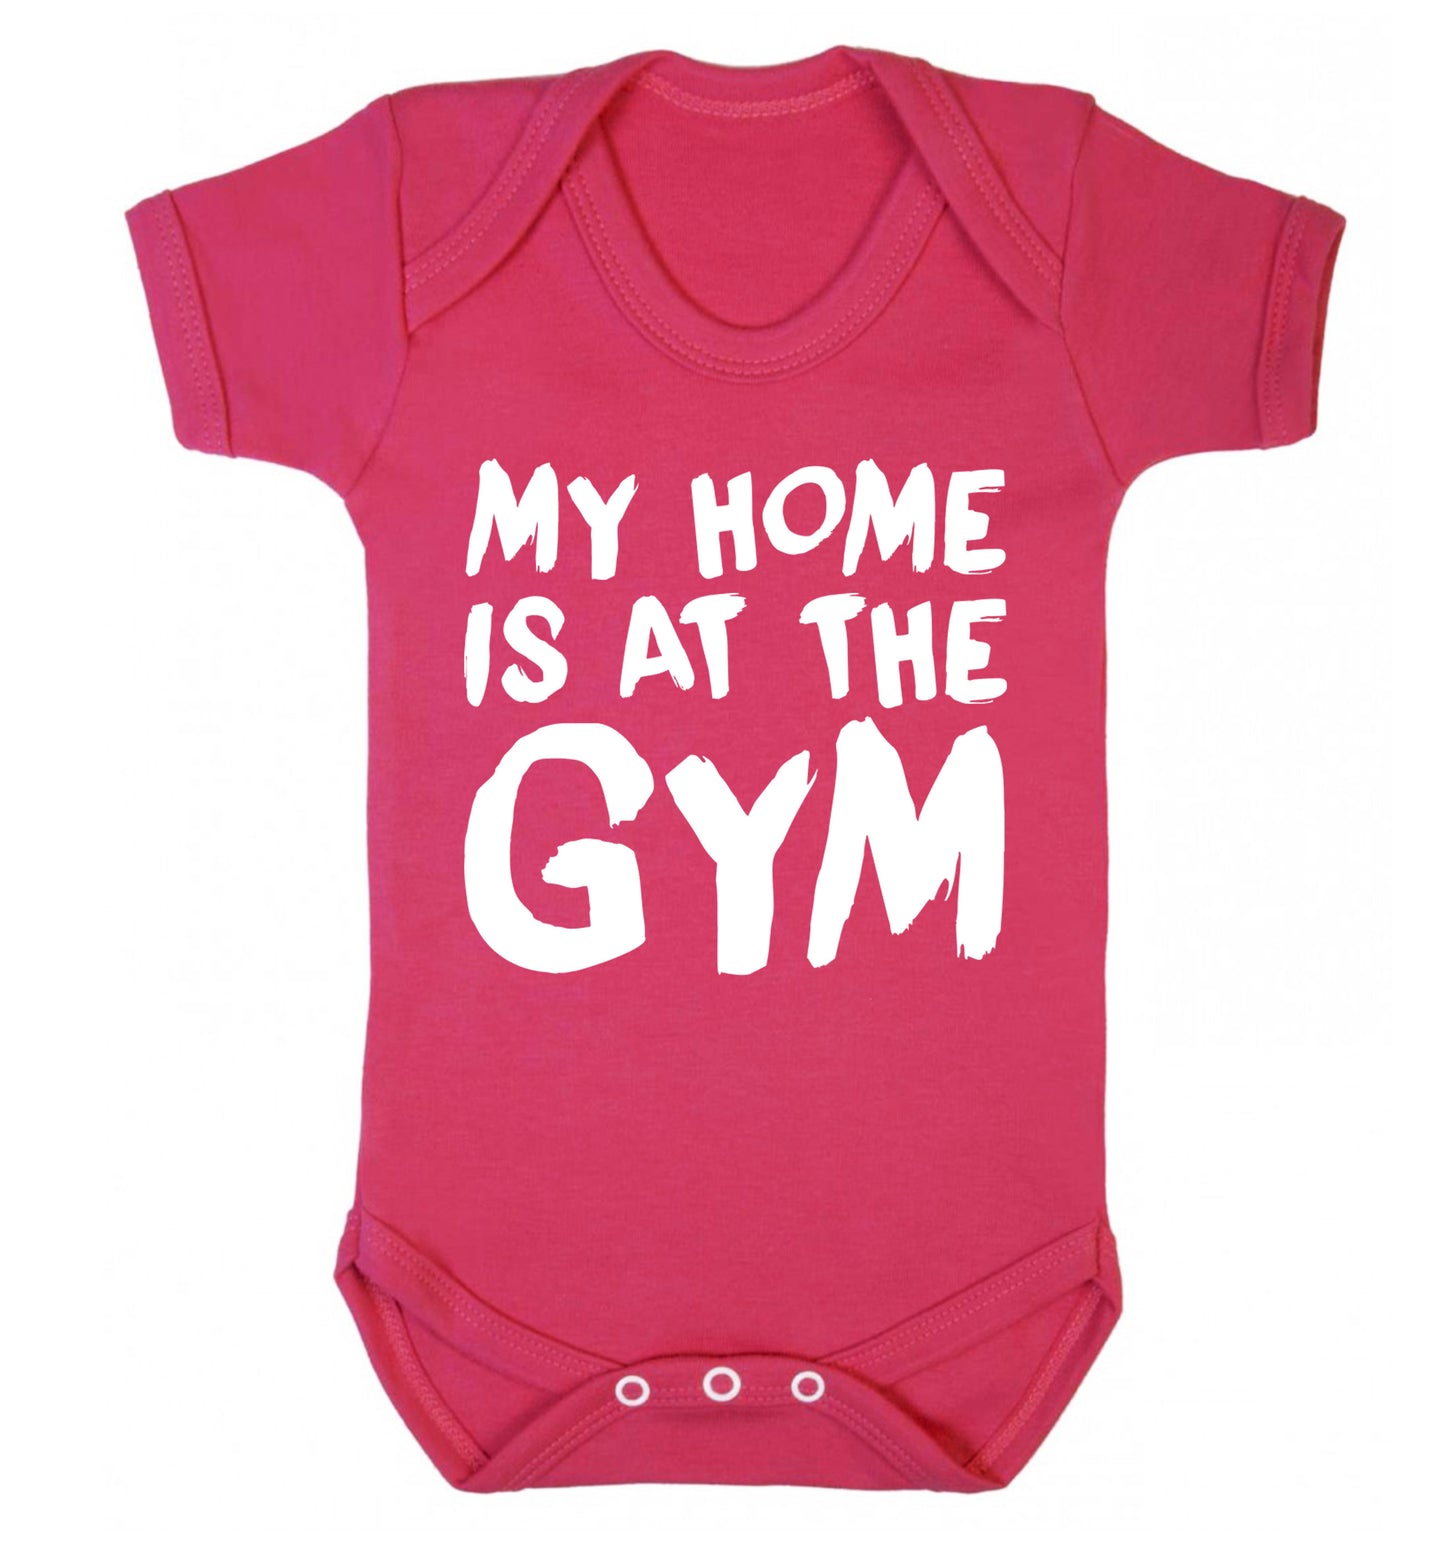 My home is at the gym Baby Vest dark pink 18-24 months